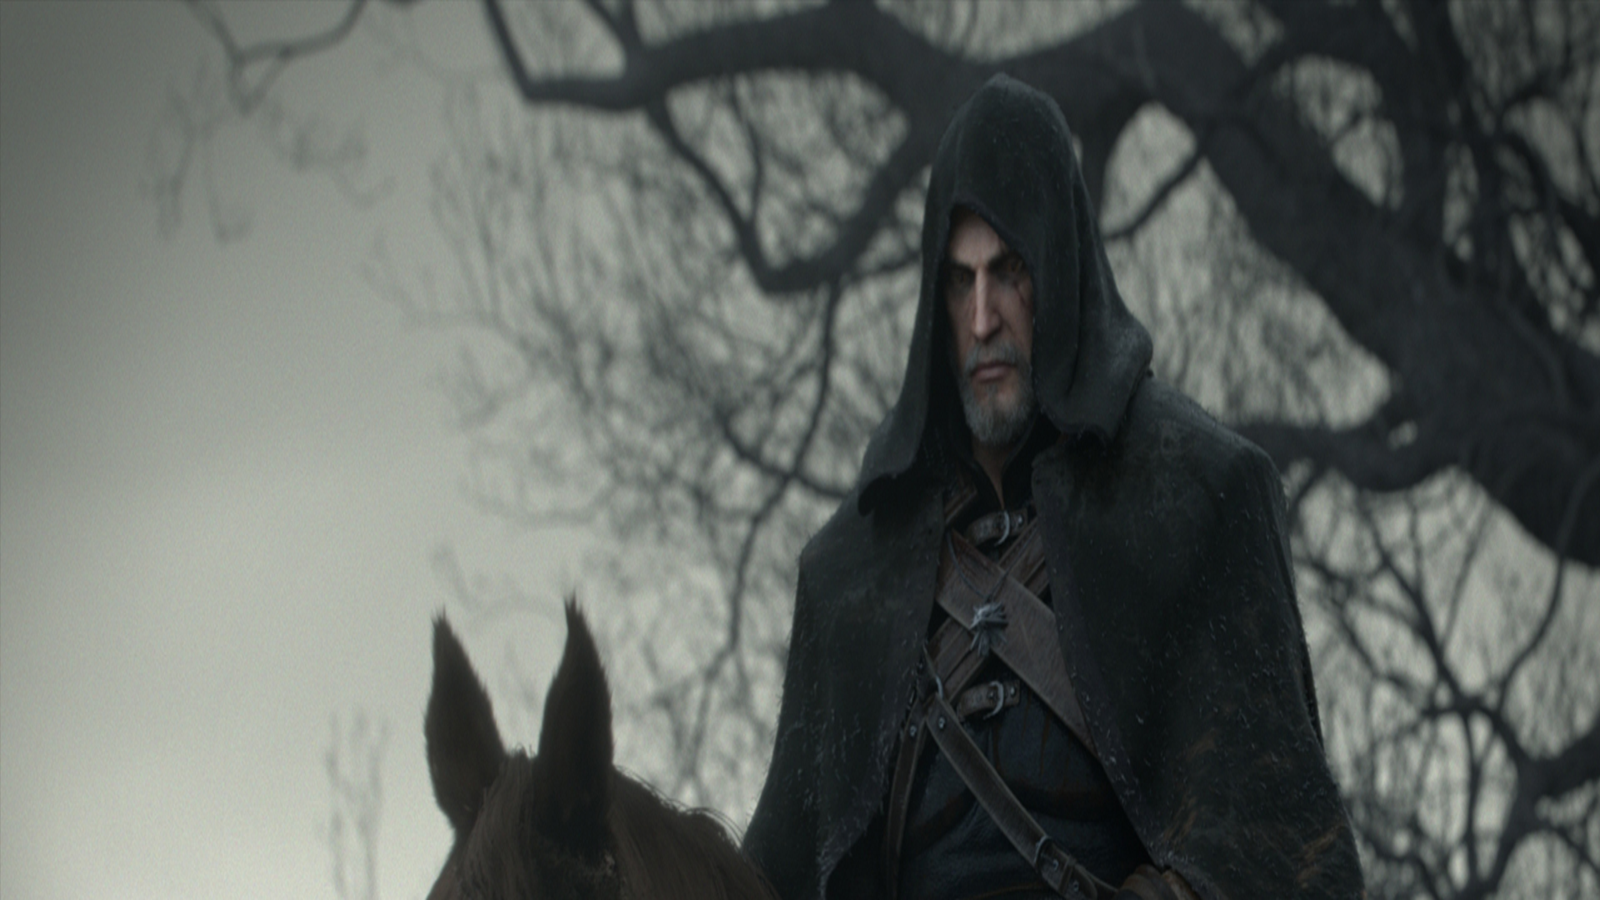 Witcher 3 for Xbox 360, PS3 is Impossible, Says Developer